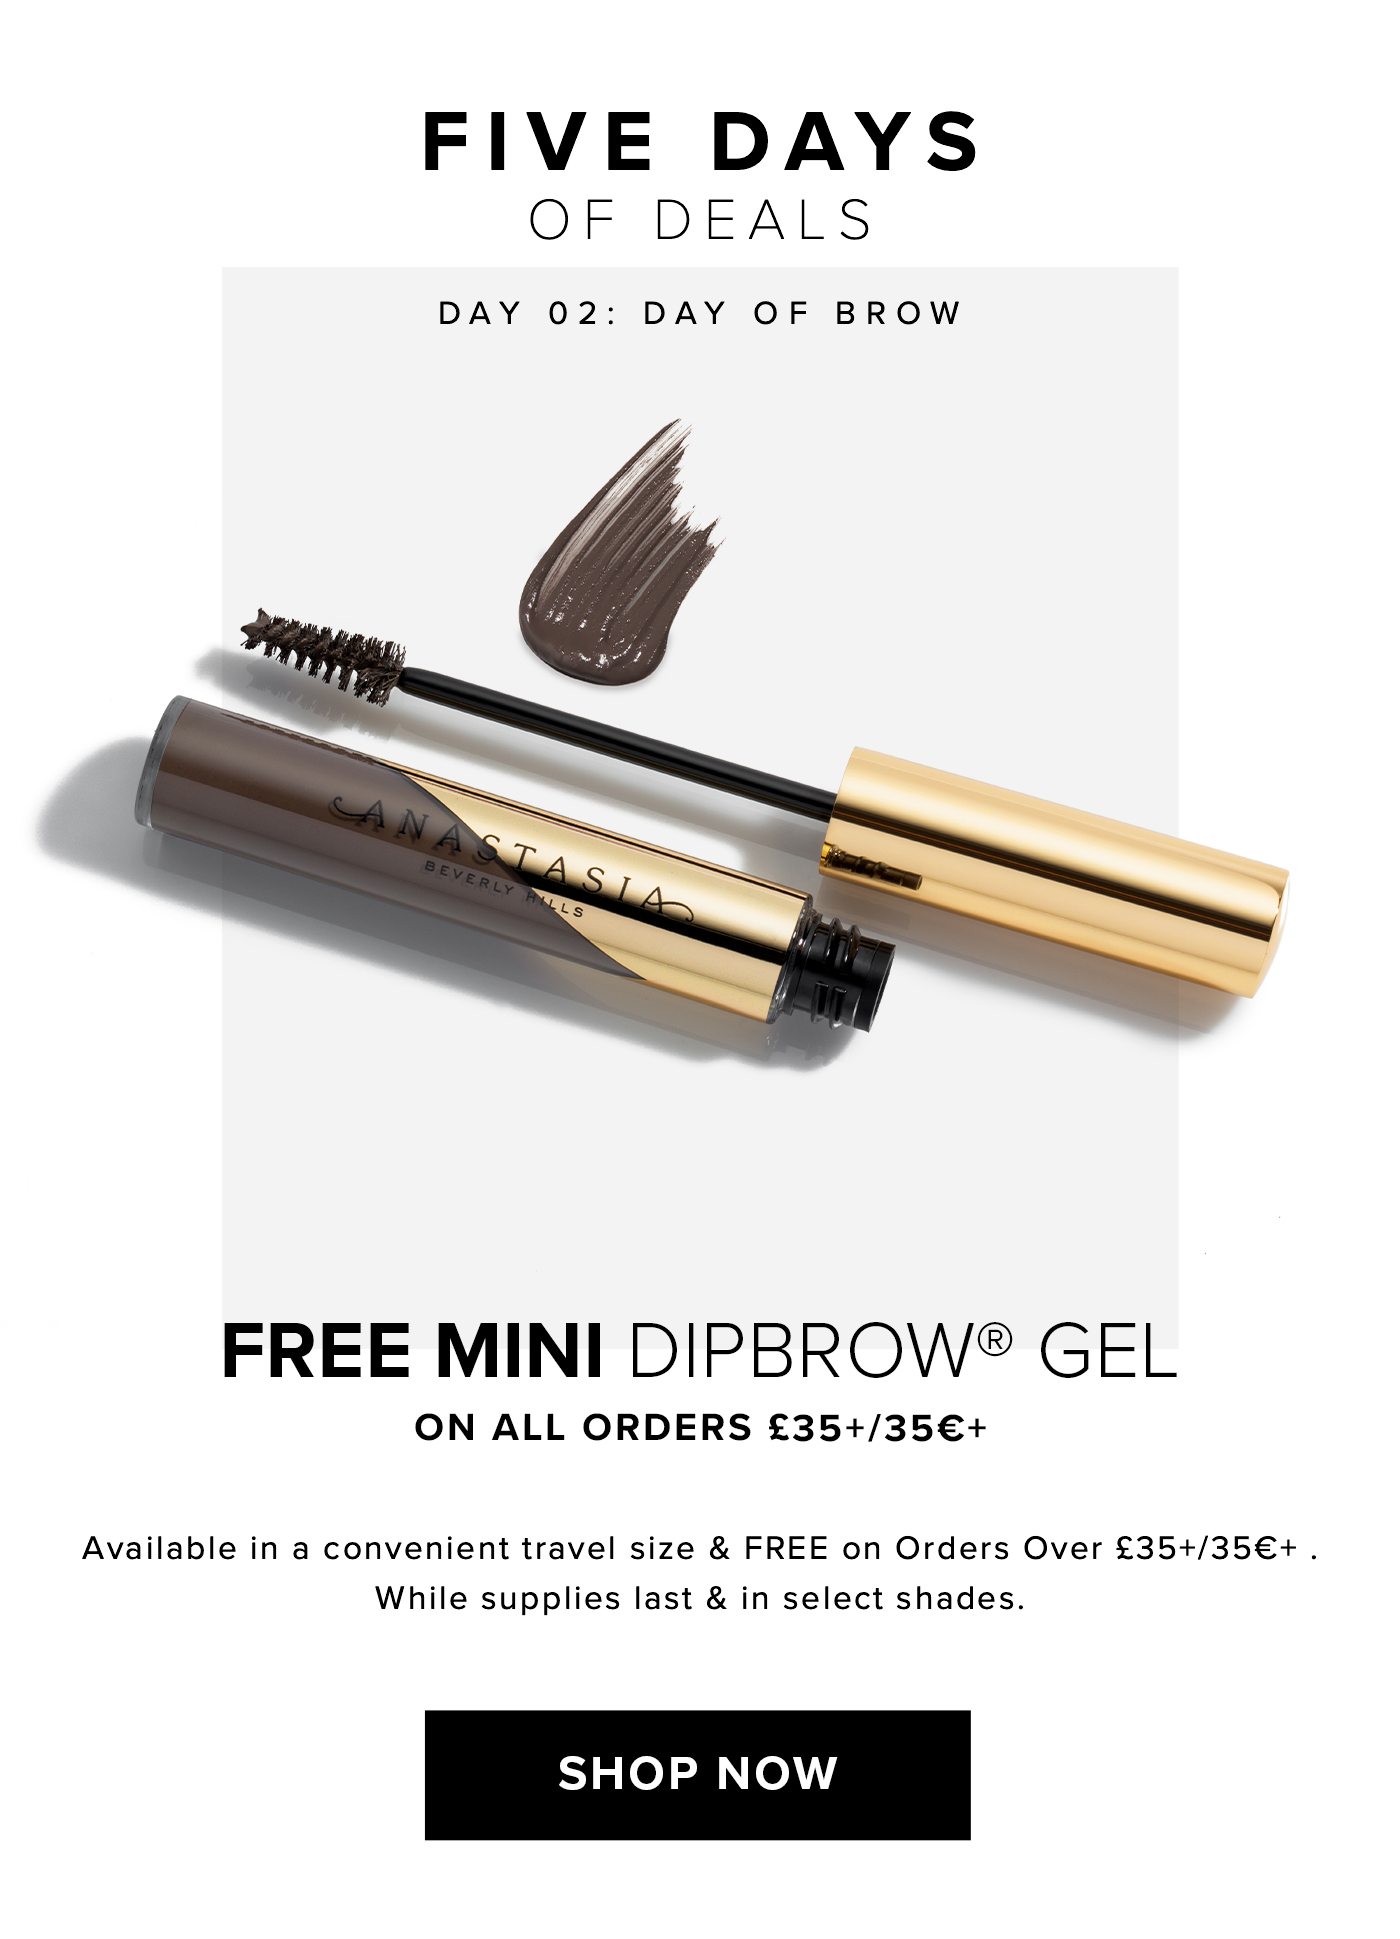 FIVE DAYS OF DEALS. DAY 02: DAY OF BROW. FREE MINI DIPBROW GEL ON ALL ORDERS ?35+/35?+ Available in a convenient travel size & FREE on Orders Over ?35+/35?+. While supplies last & in select shades. SHOP NOW